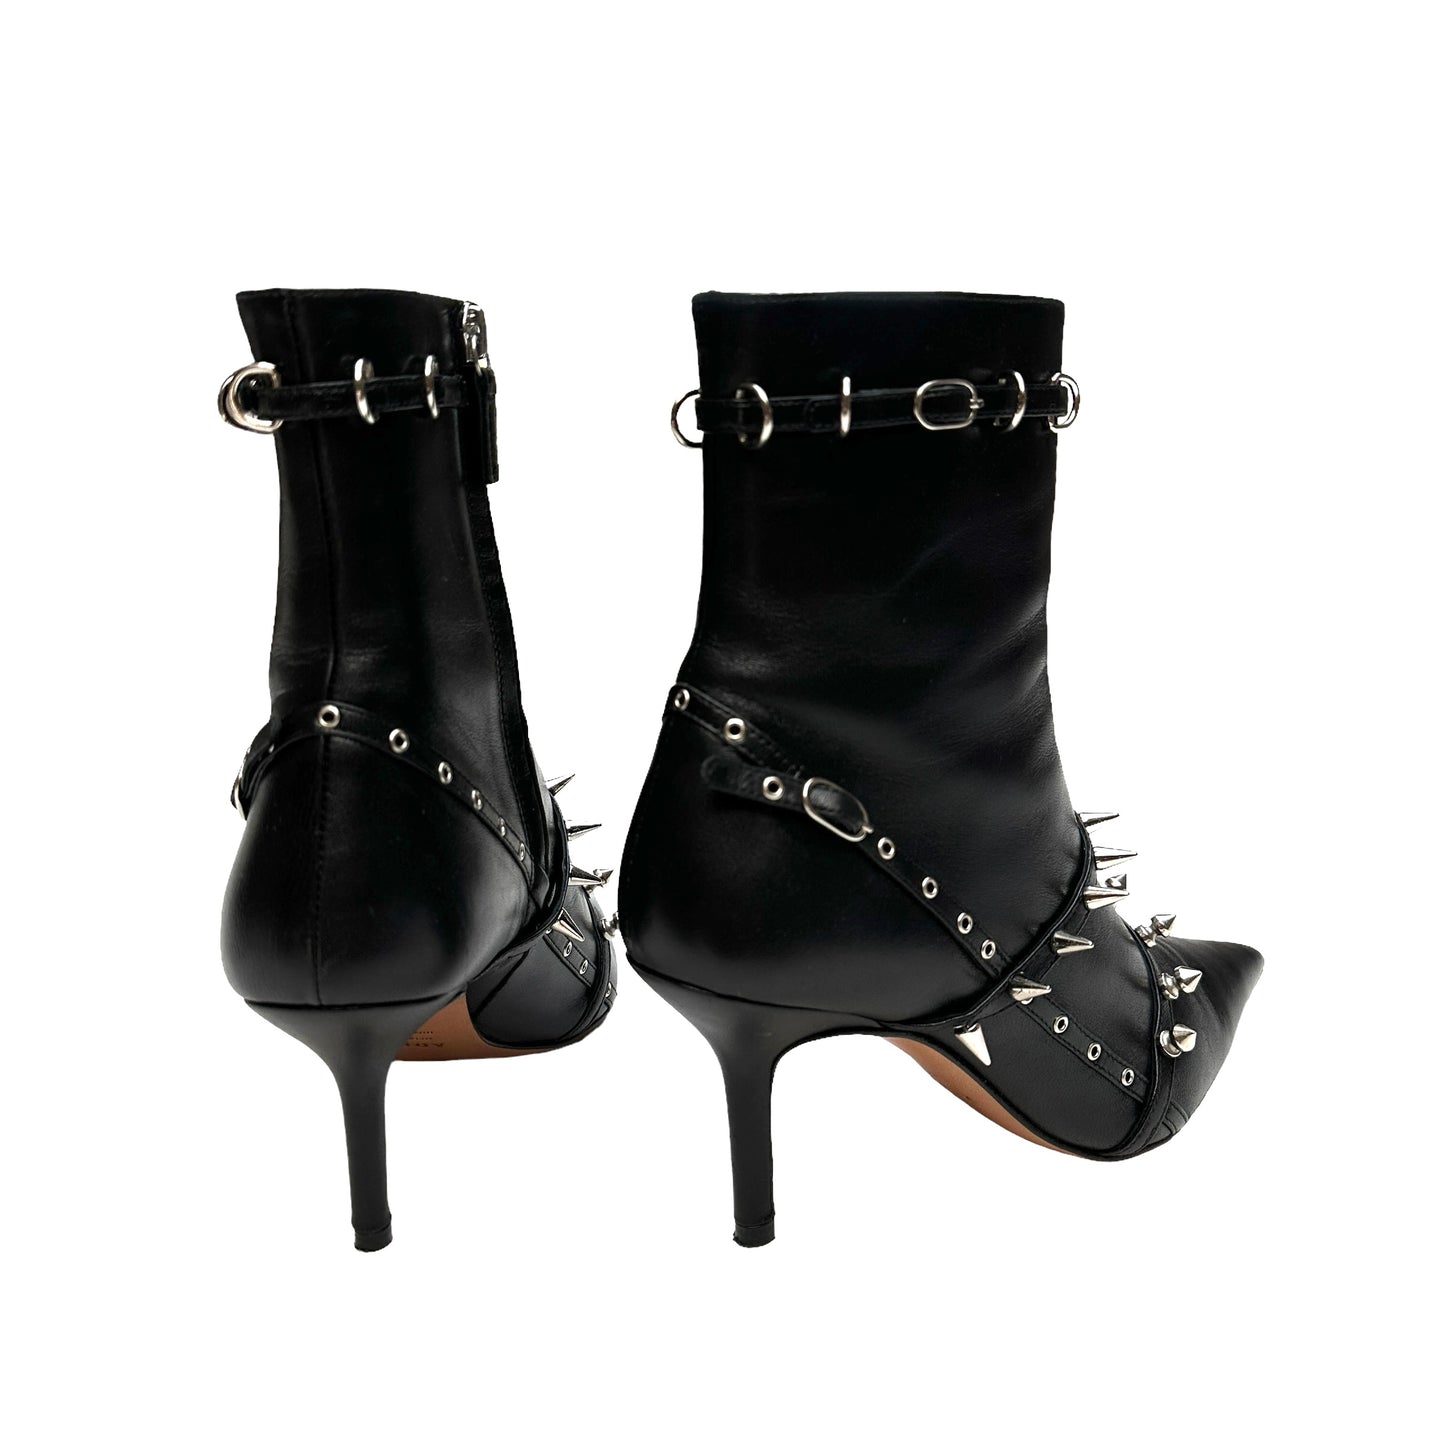 Black Boots with Spikes - 8